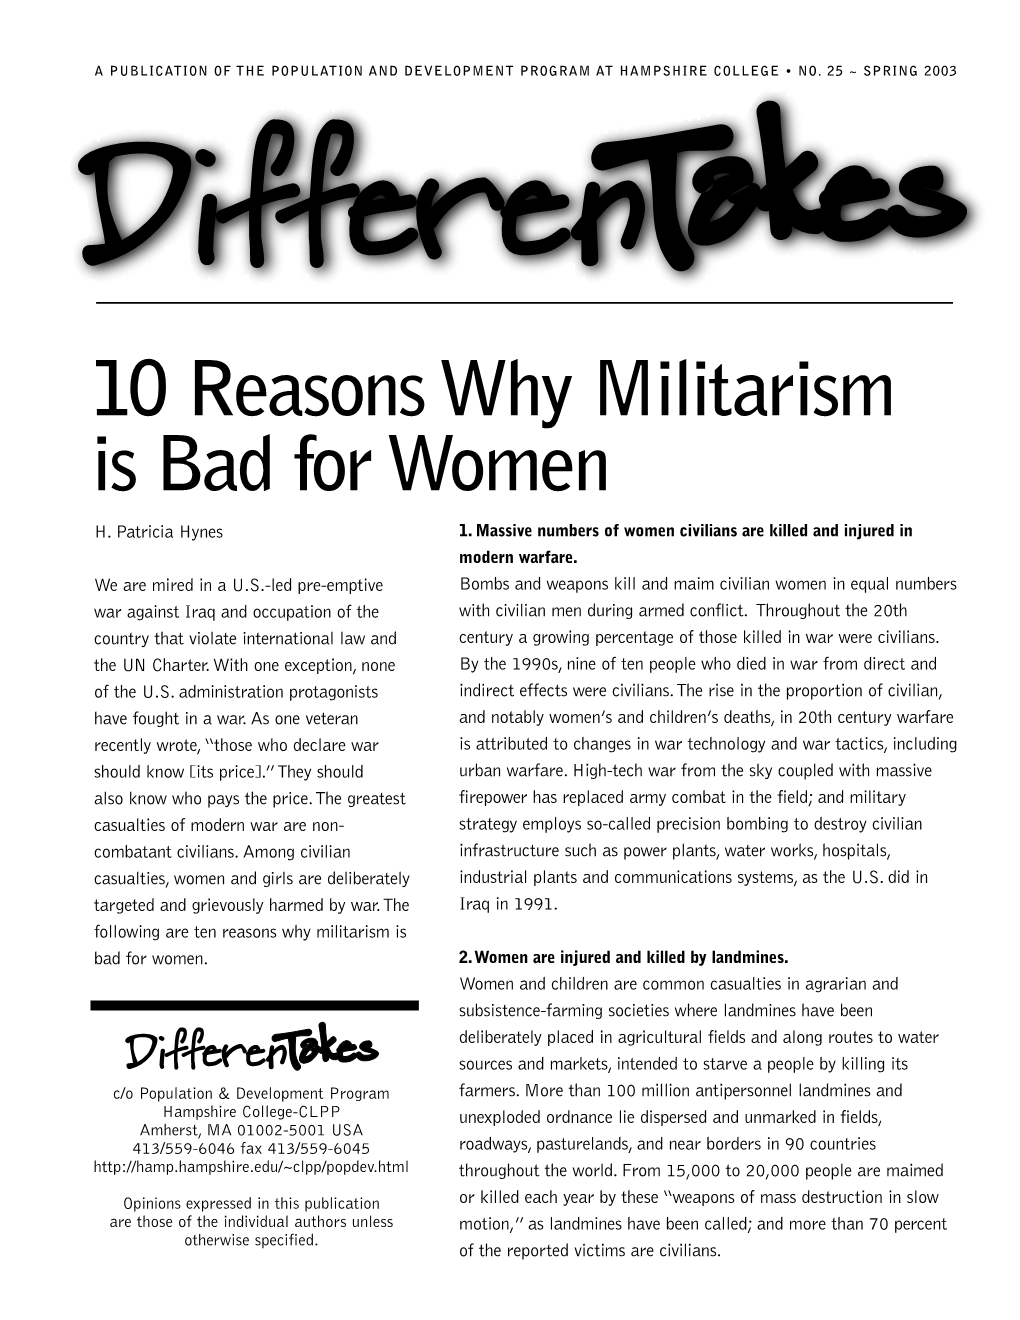 10 Reasons Why Militarism Is Bad for Women